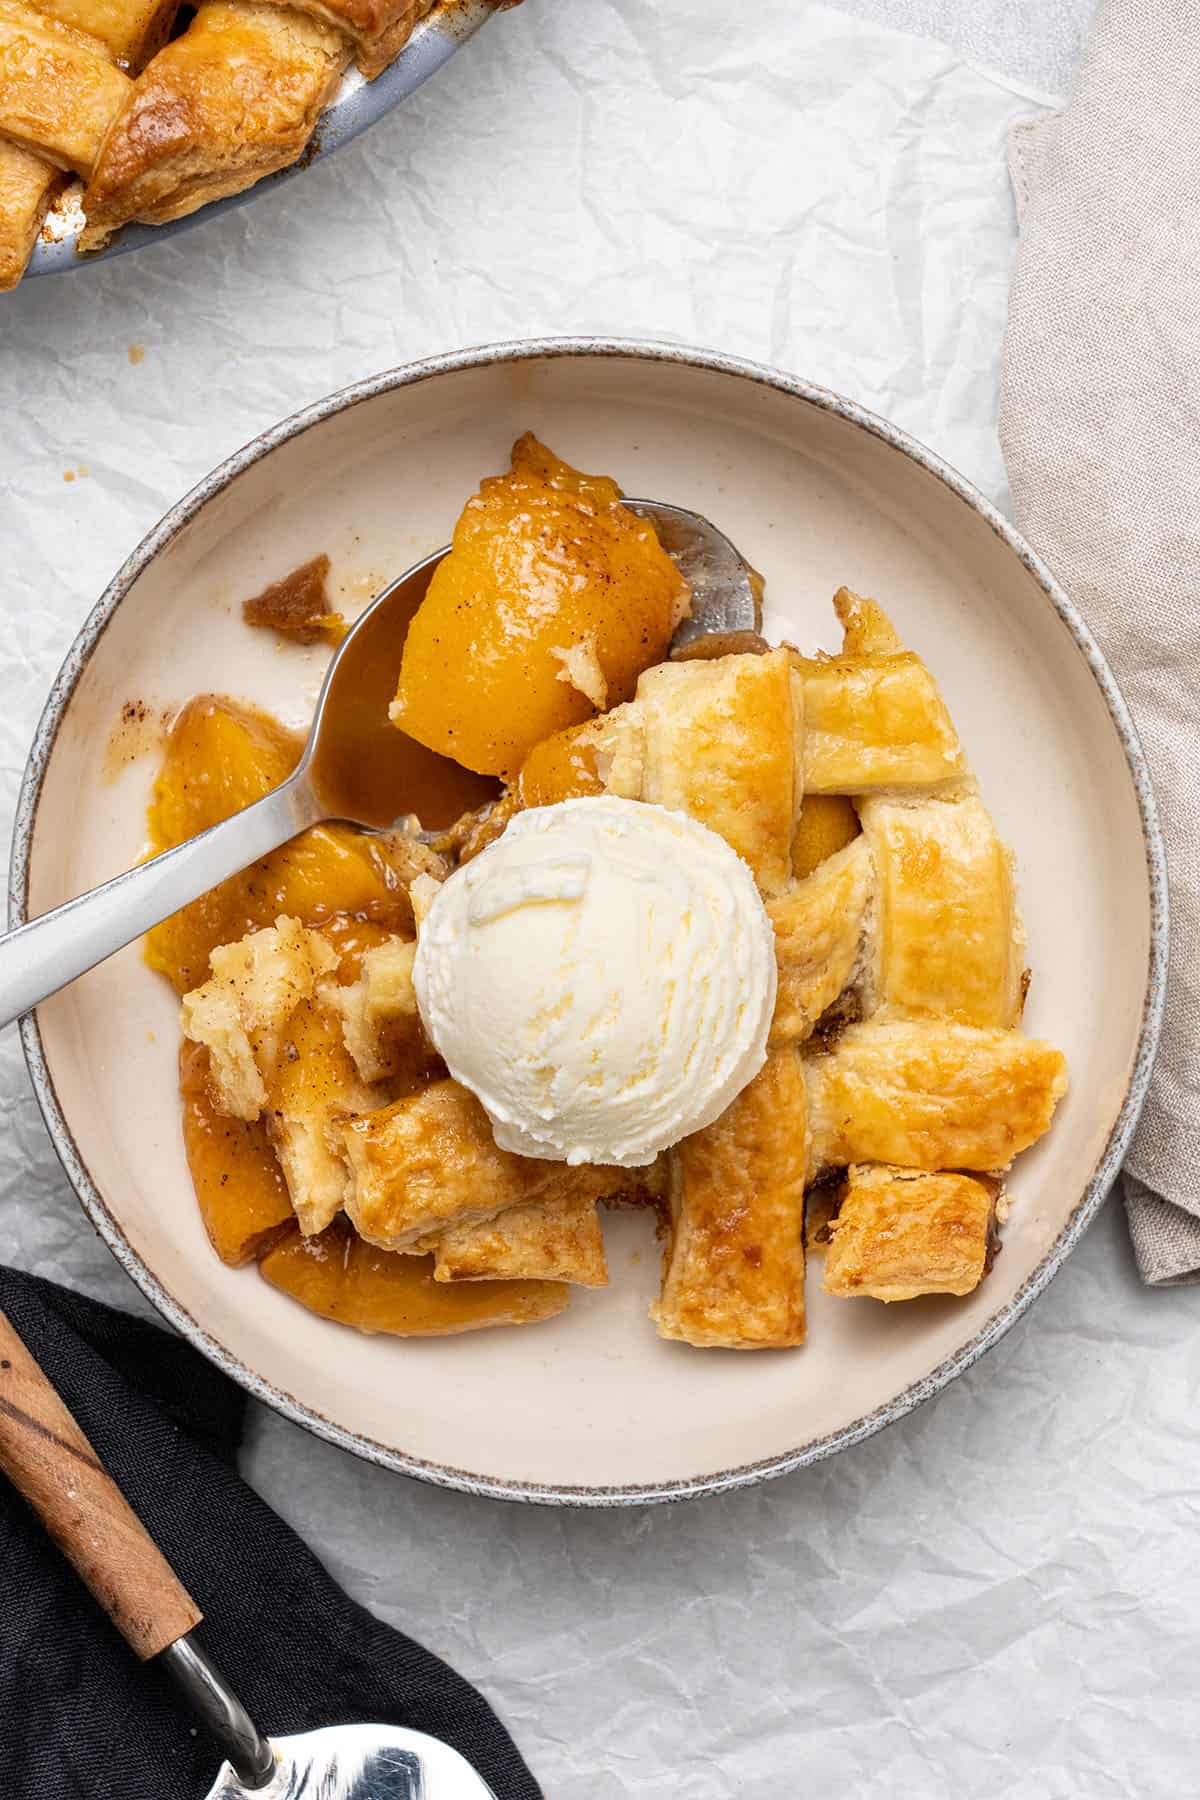 peach cobbler with pie crust and a scoop of ice cream.